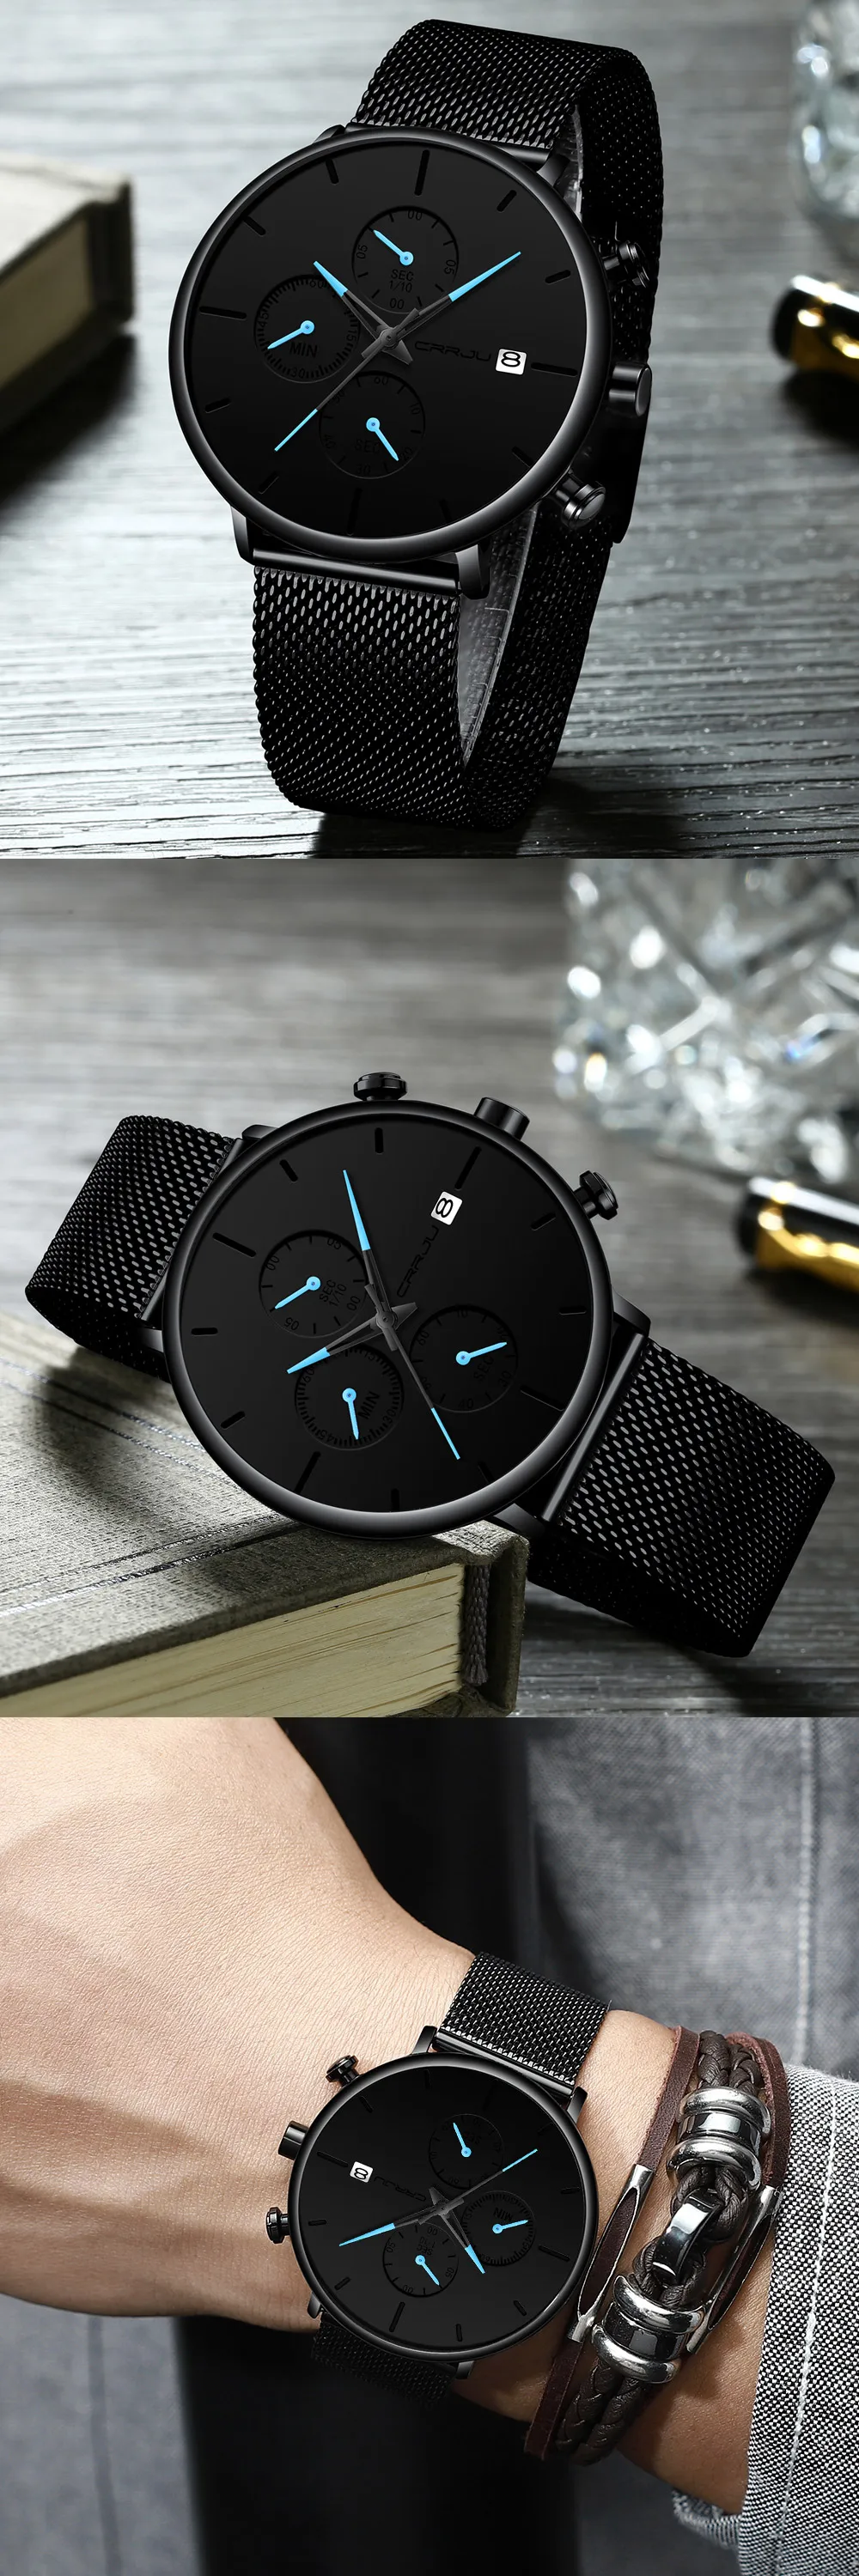 Mens Women StopWatches CRRJU Unique Design Luxury Sport Wrist Watch Stainless Steel Mesh Strap Men's Fashion Casual Date Watches